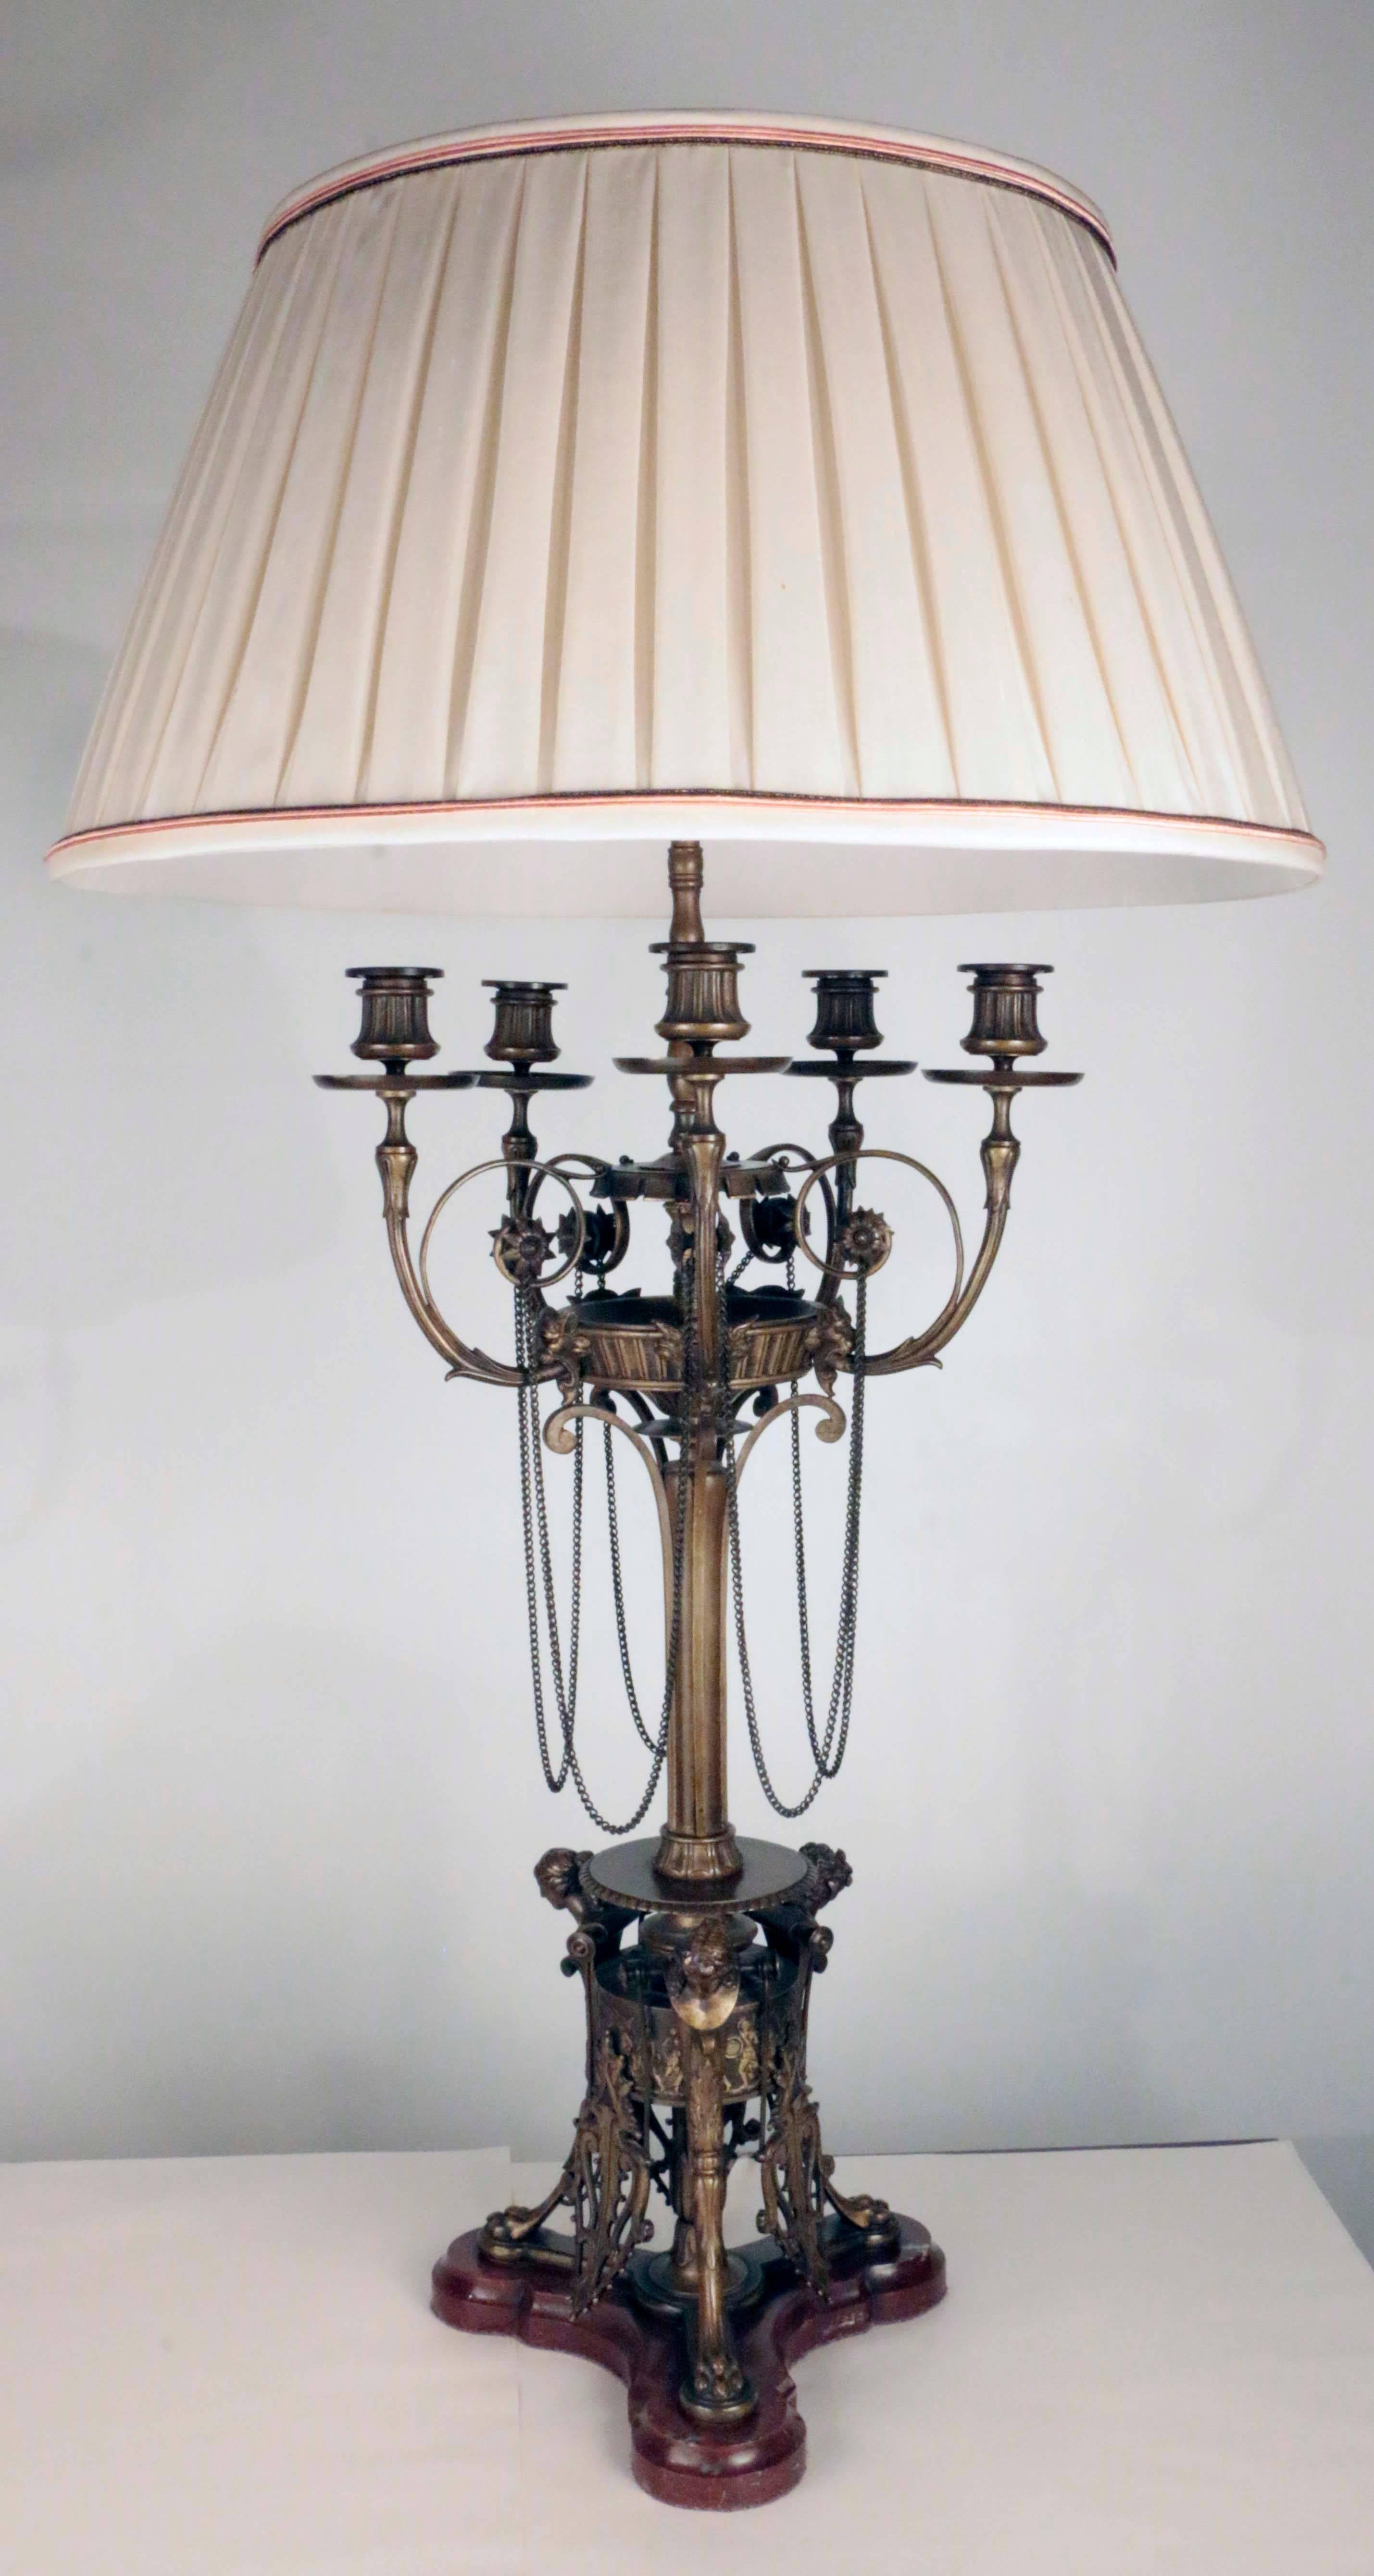 A fine pair of Renaissance Revival  bronze candelabra, now mounted as lamps. Each slender stem supporting five scrolling arms linked by chains, the trefoil platform base modeled with three female heads above paw feet, on a finely beveled and shaped